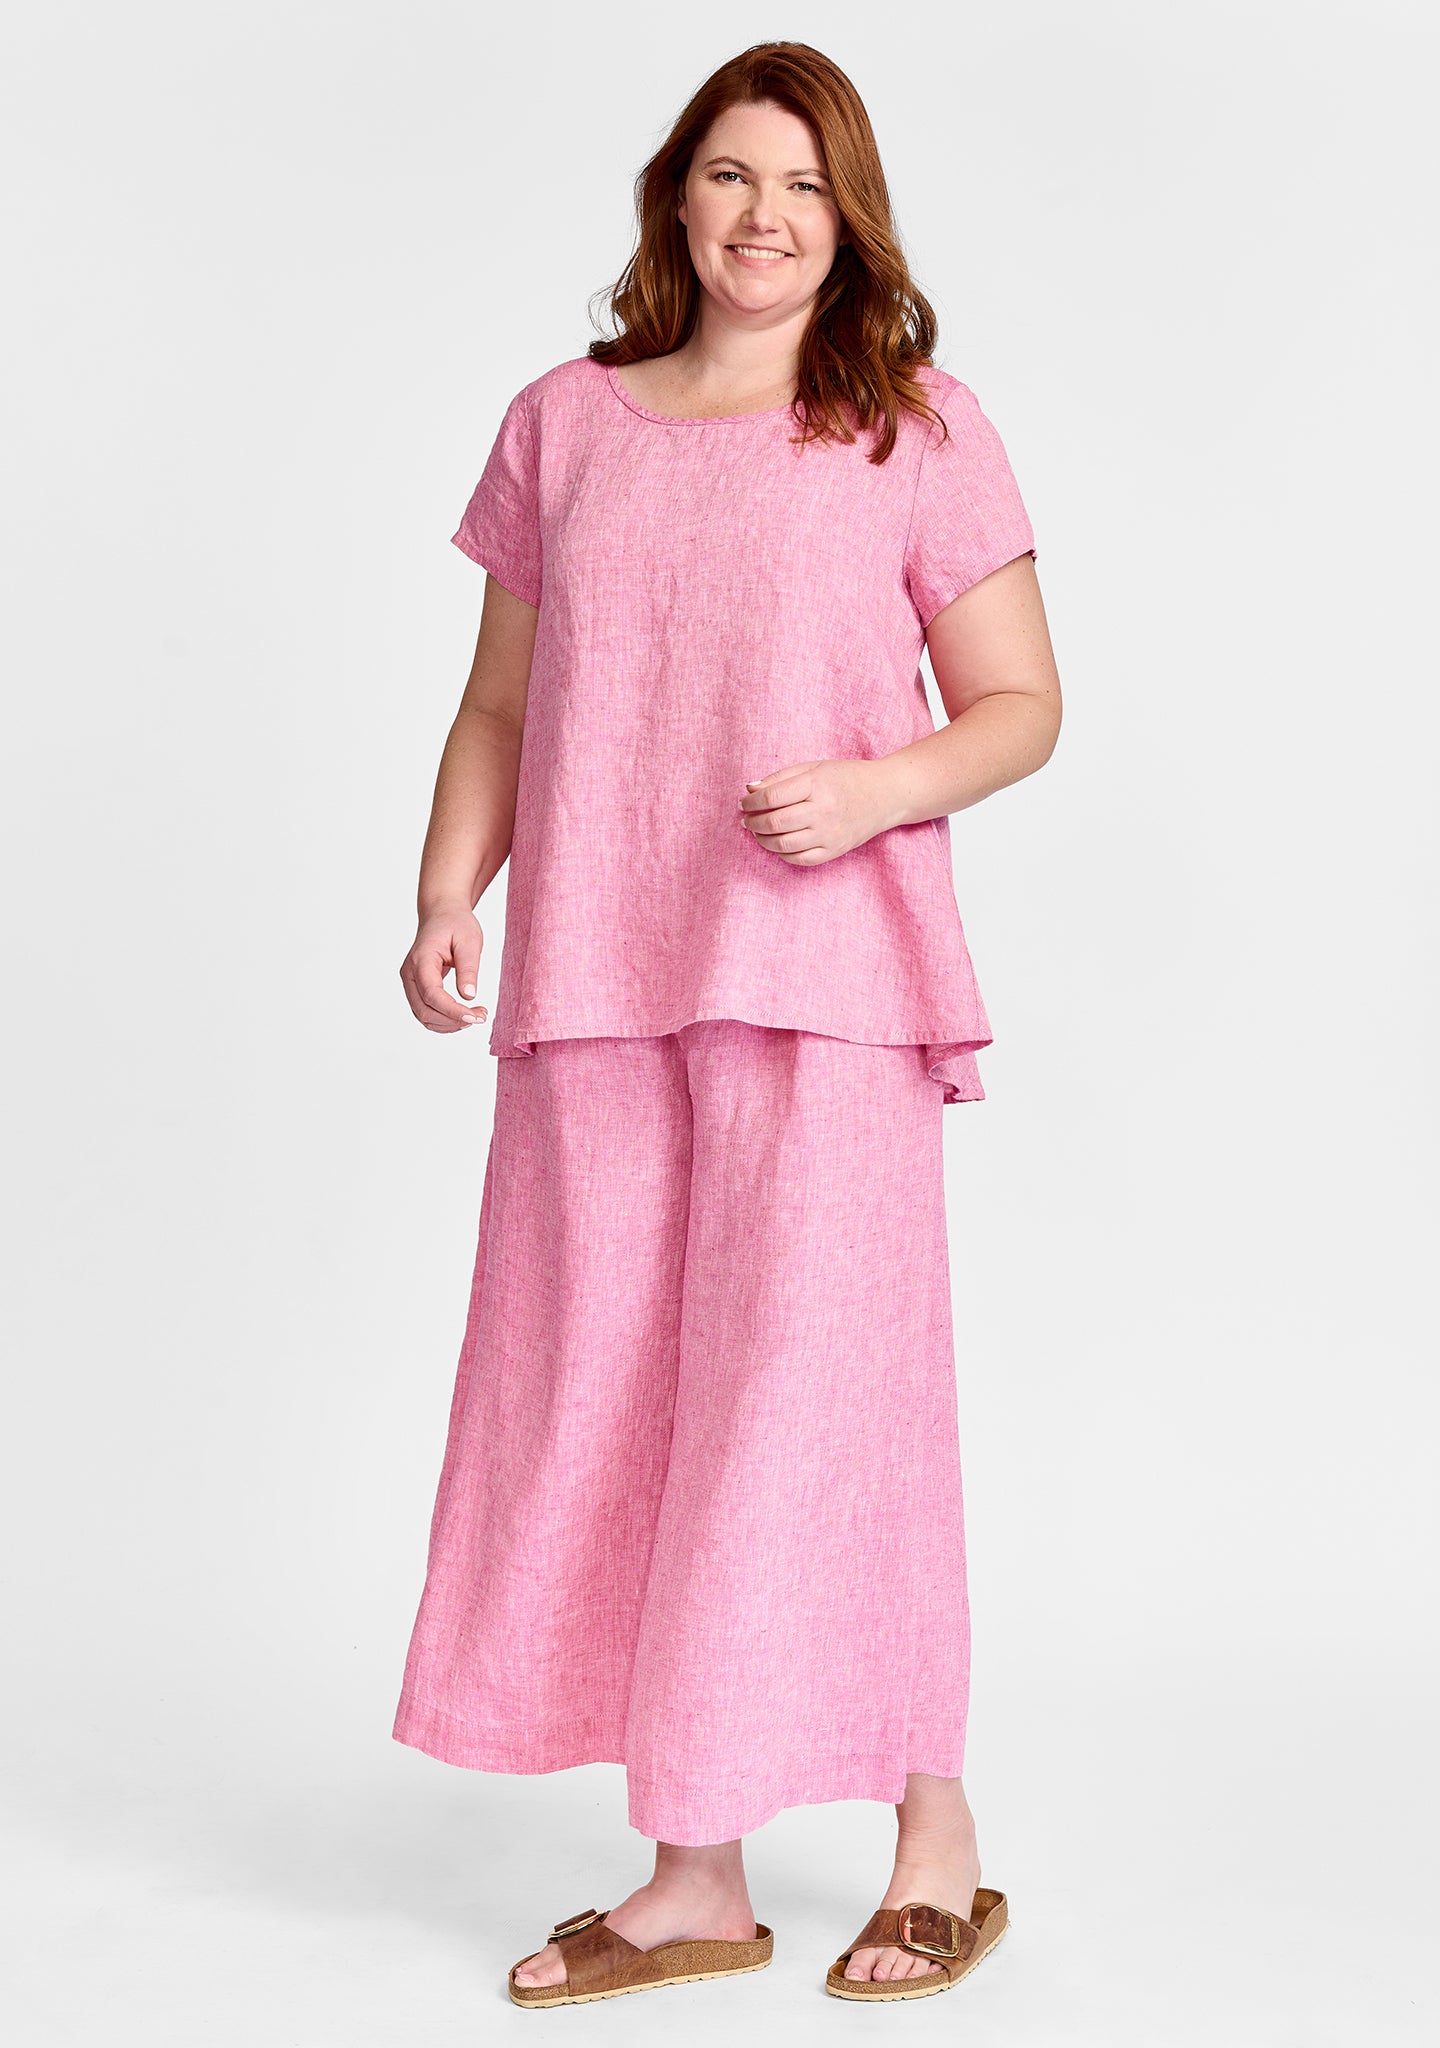 FLAX linen tee in pink with linen pants in pink